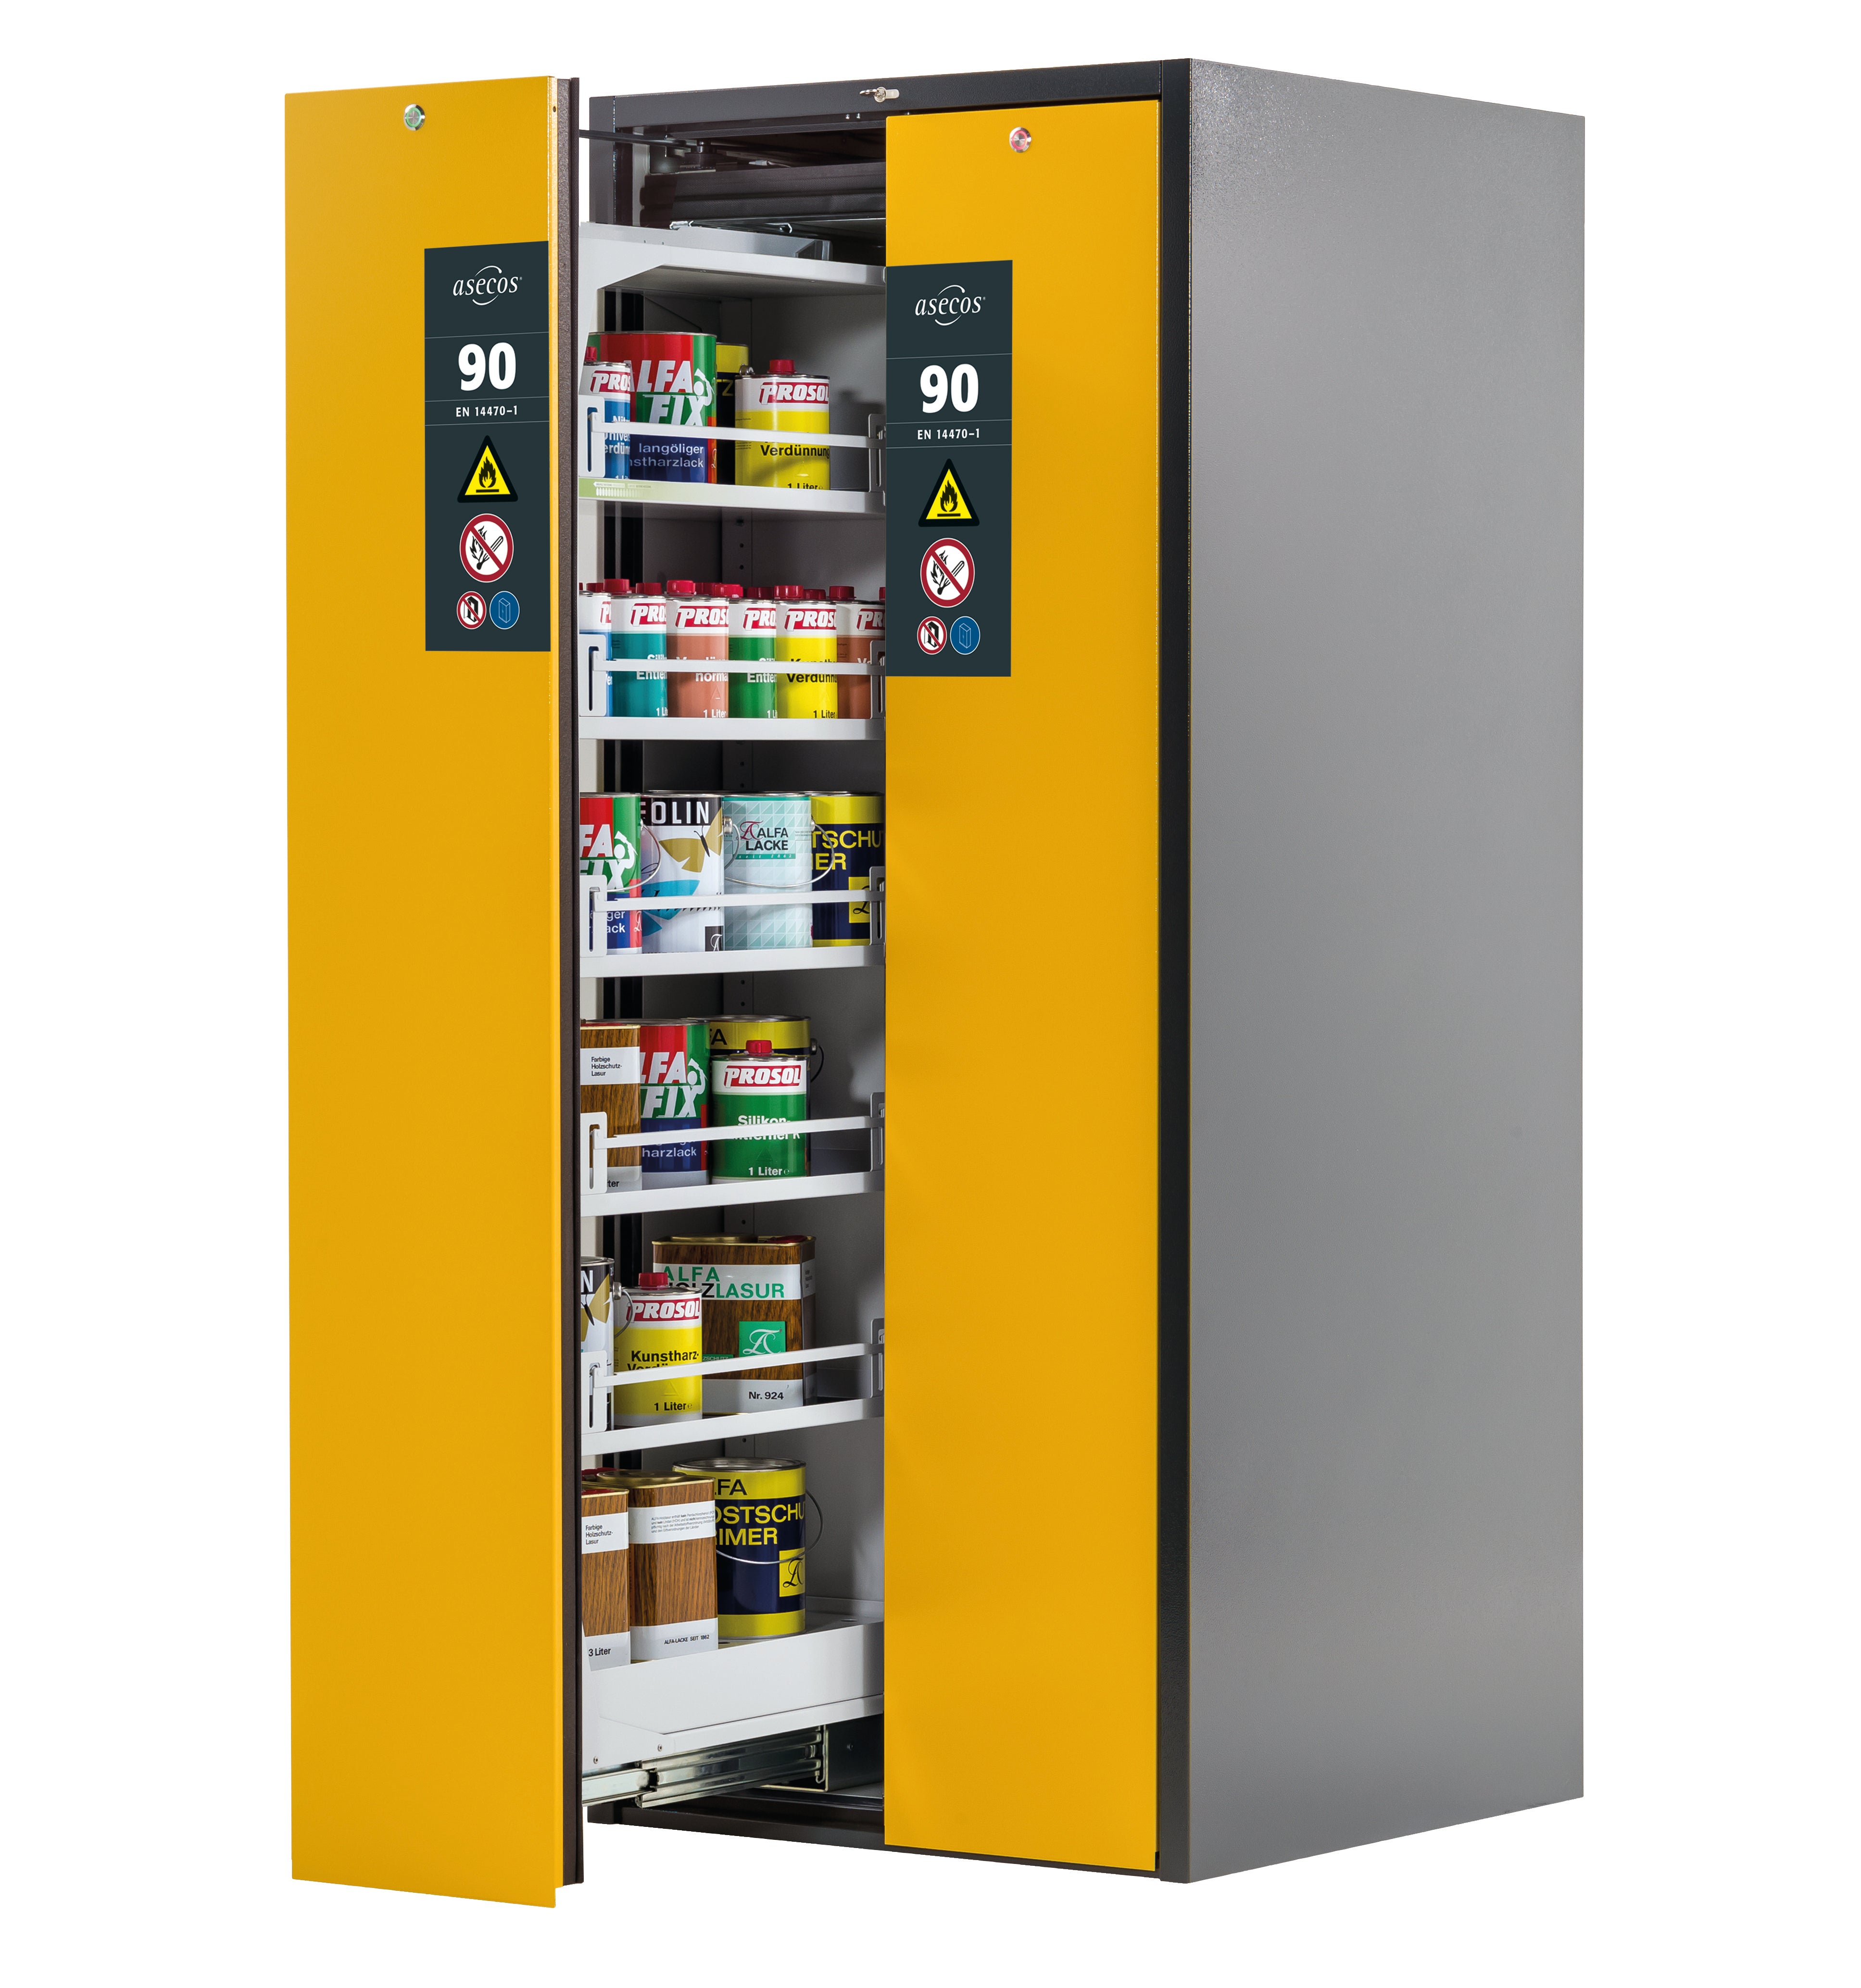 Type 90 safety cabinet V-MOVE-90 model V90.196.081.VDAC:0013 in safety yellow RAL 1004 with 5x standard shelves (sheet steel)